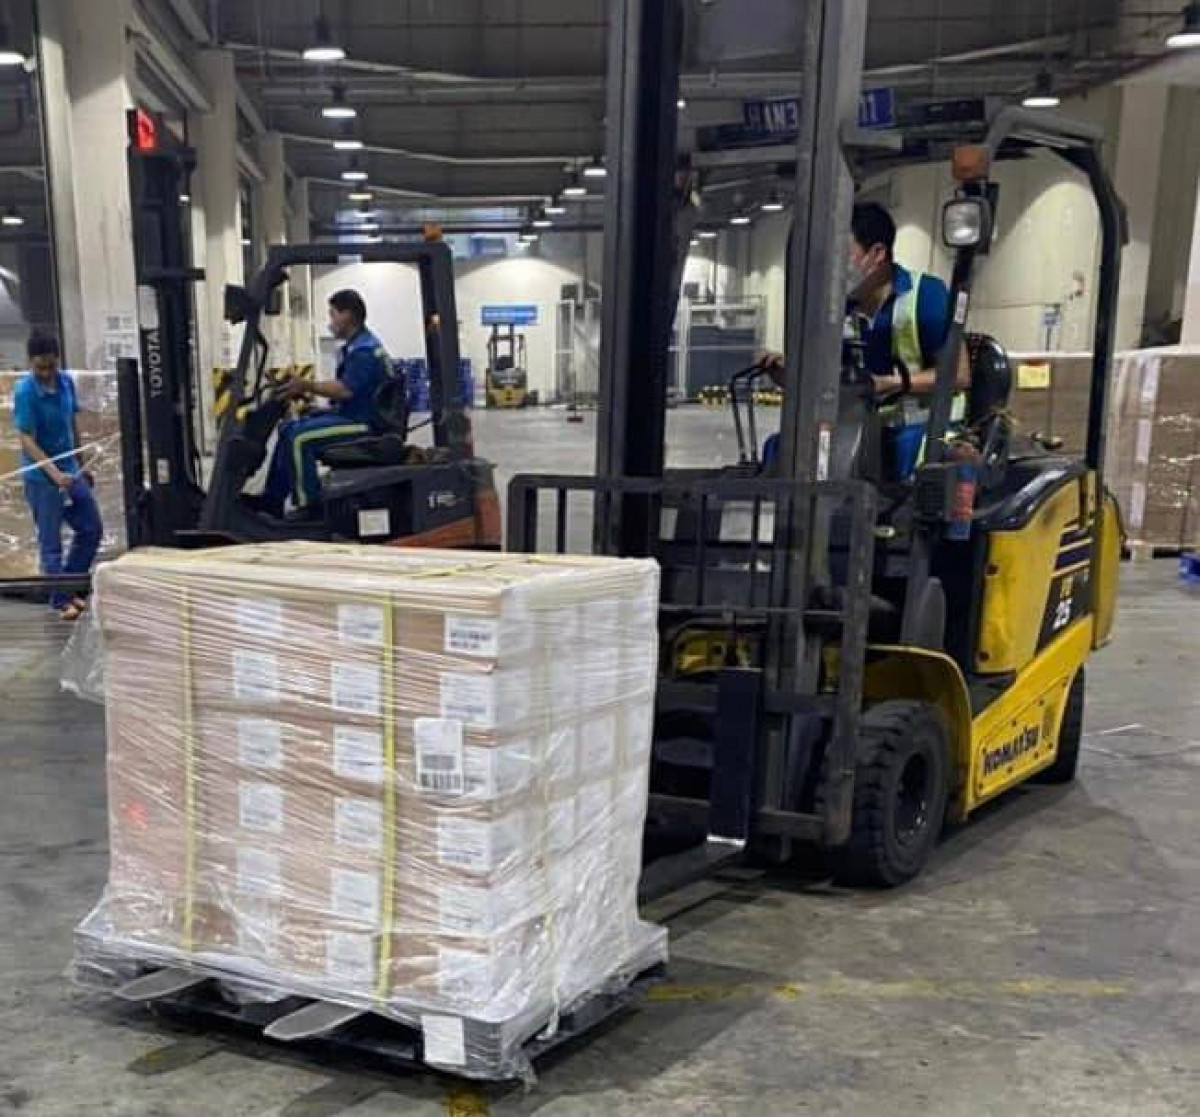 An initial batch of 921,600 doses of COVID-19 vaccines financed by the Australian Government arrives at Noi Bai International Airport